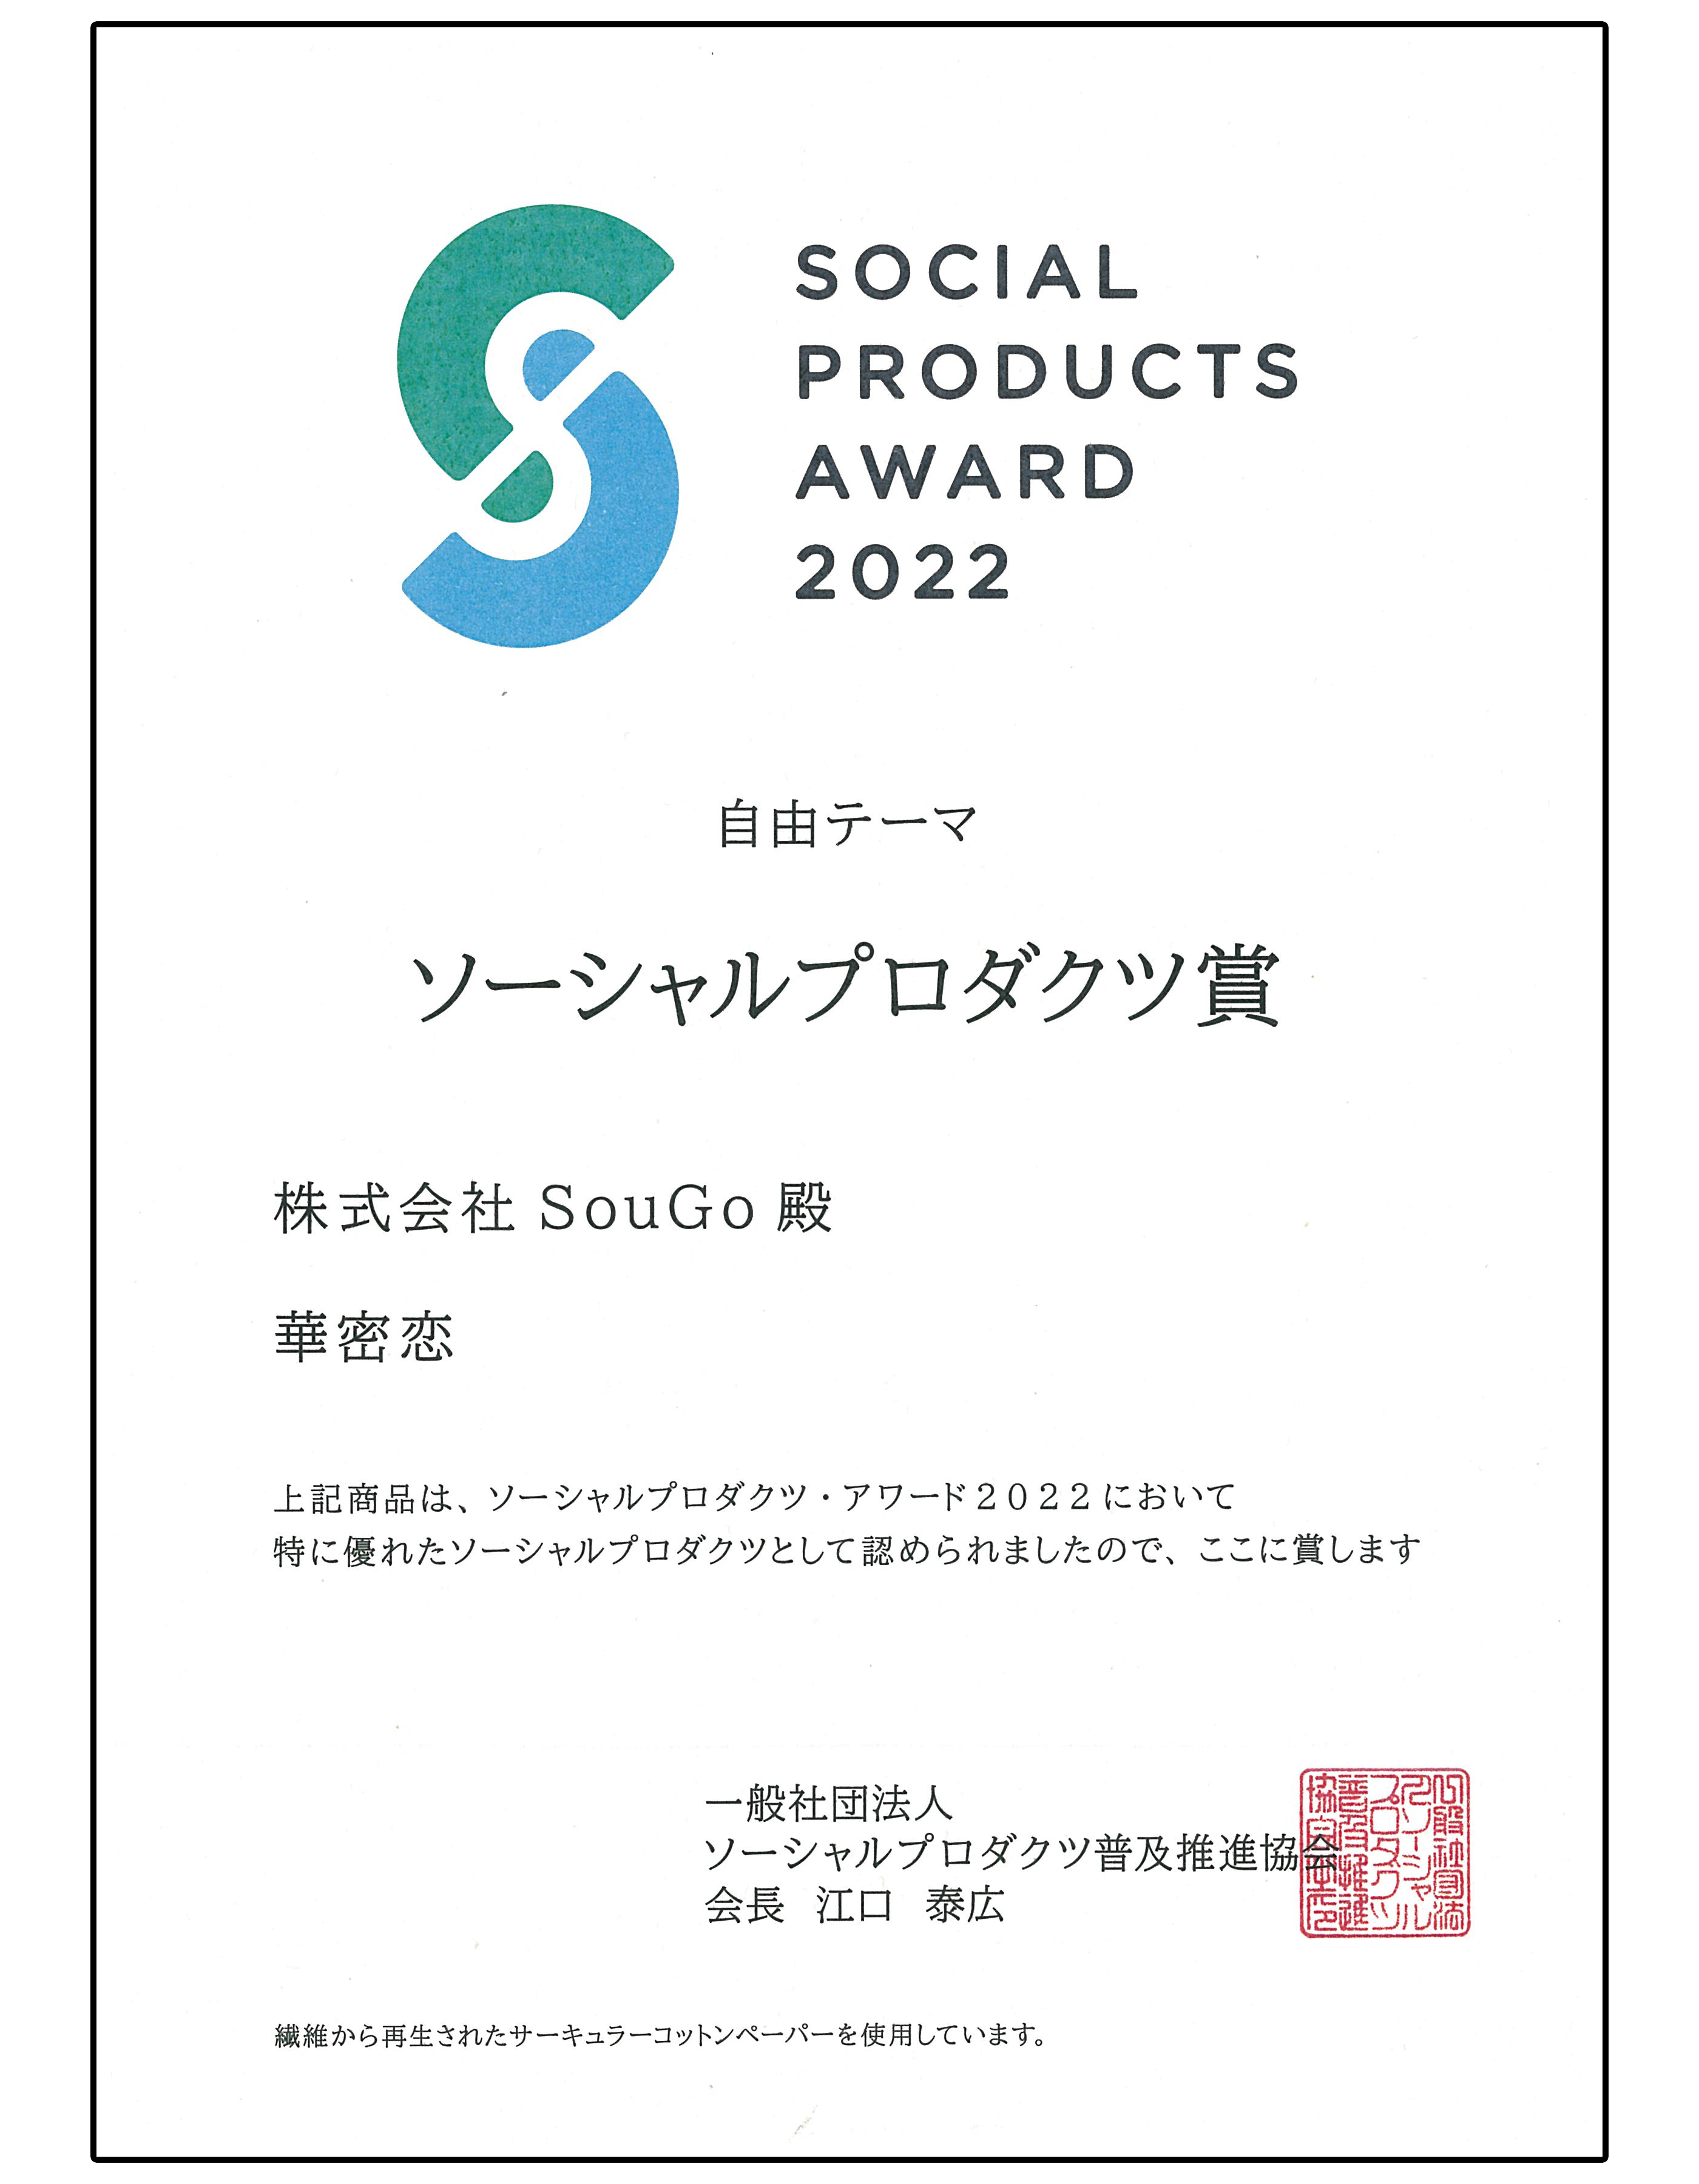 Received the Social Products Award 2022 Social Products Award